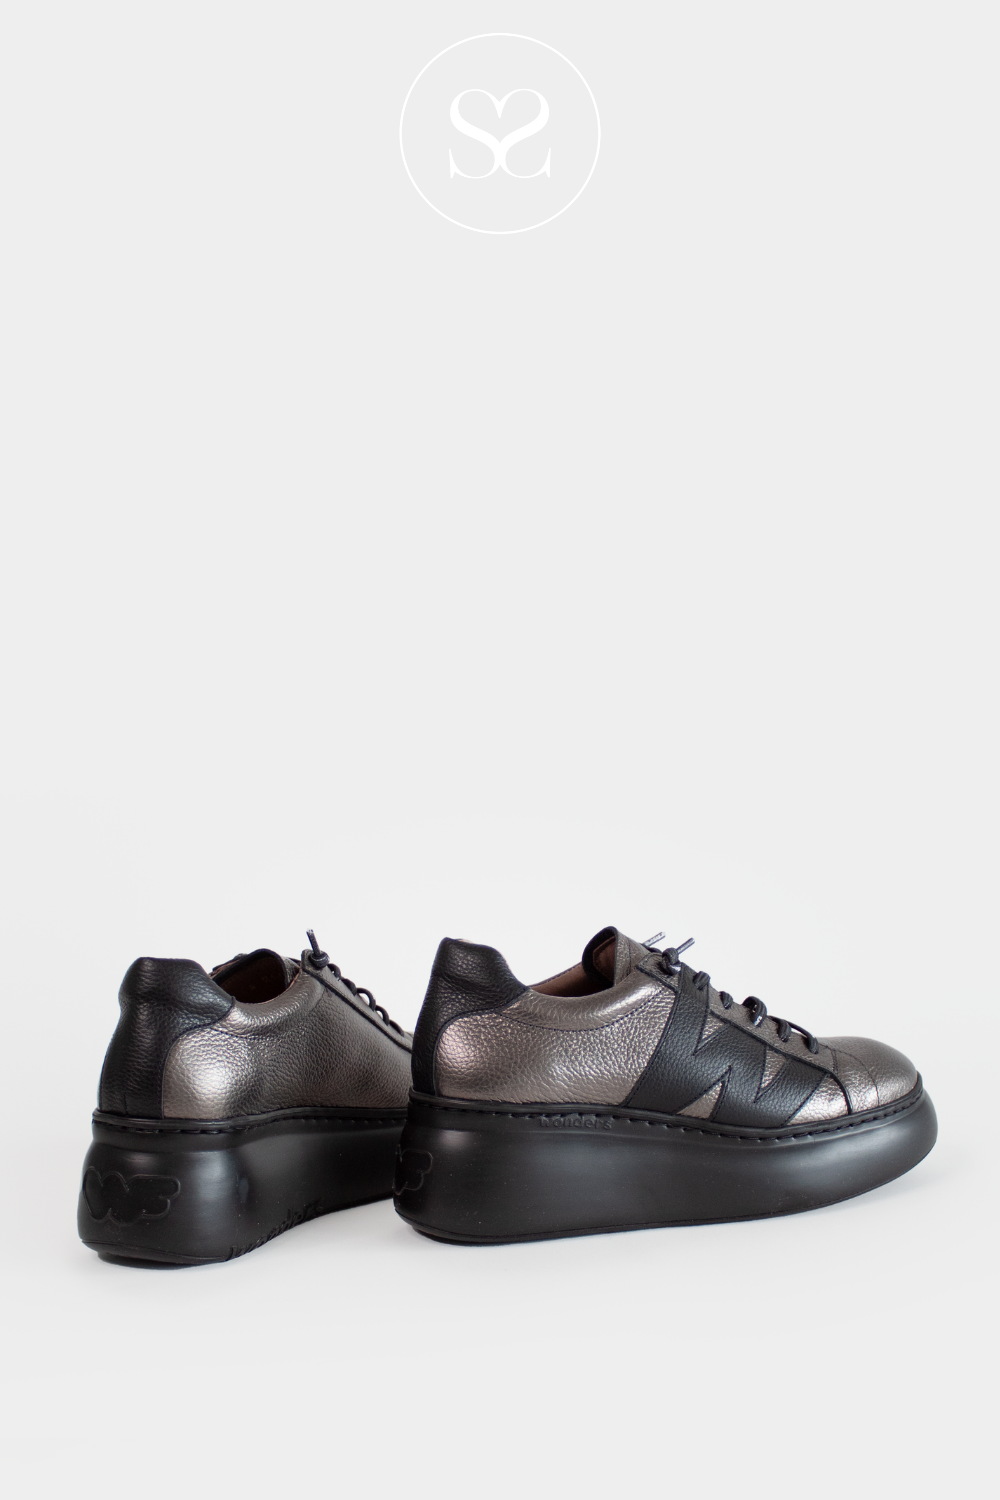 WONDERS A-2660 SILVER LEATHER PULL ON  WEDGE TRAINERS